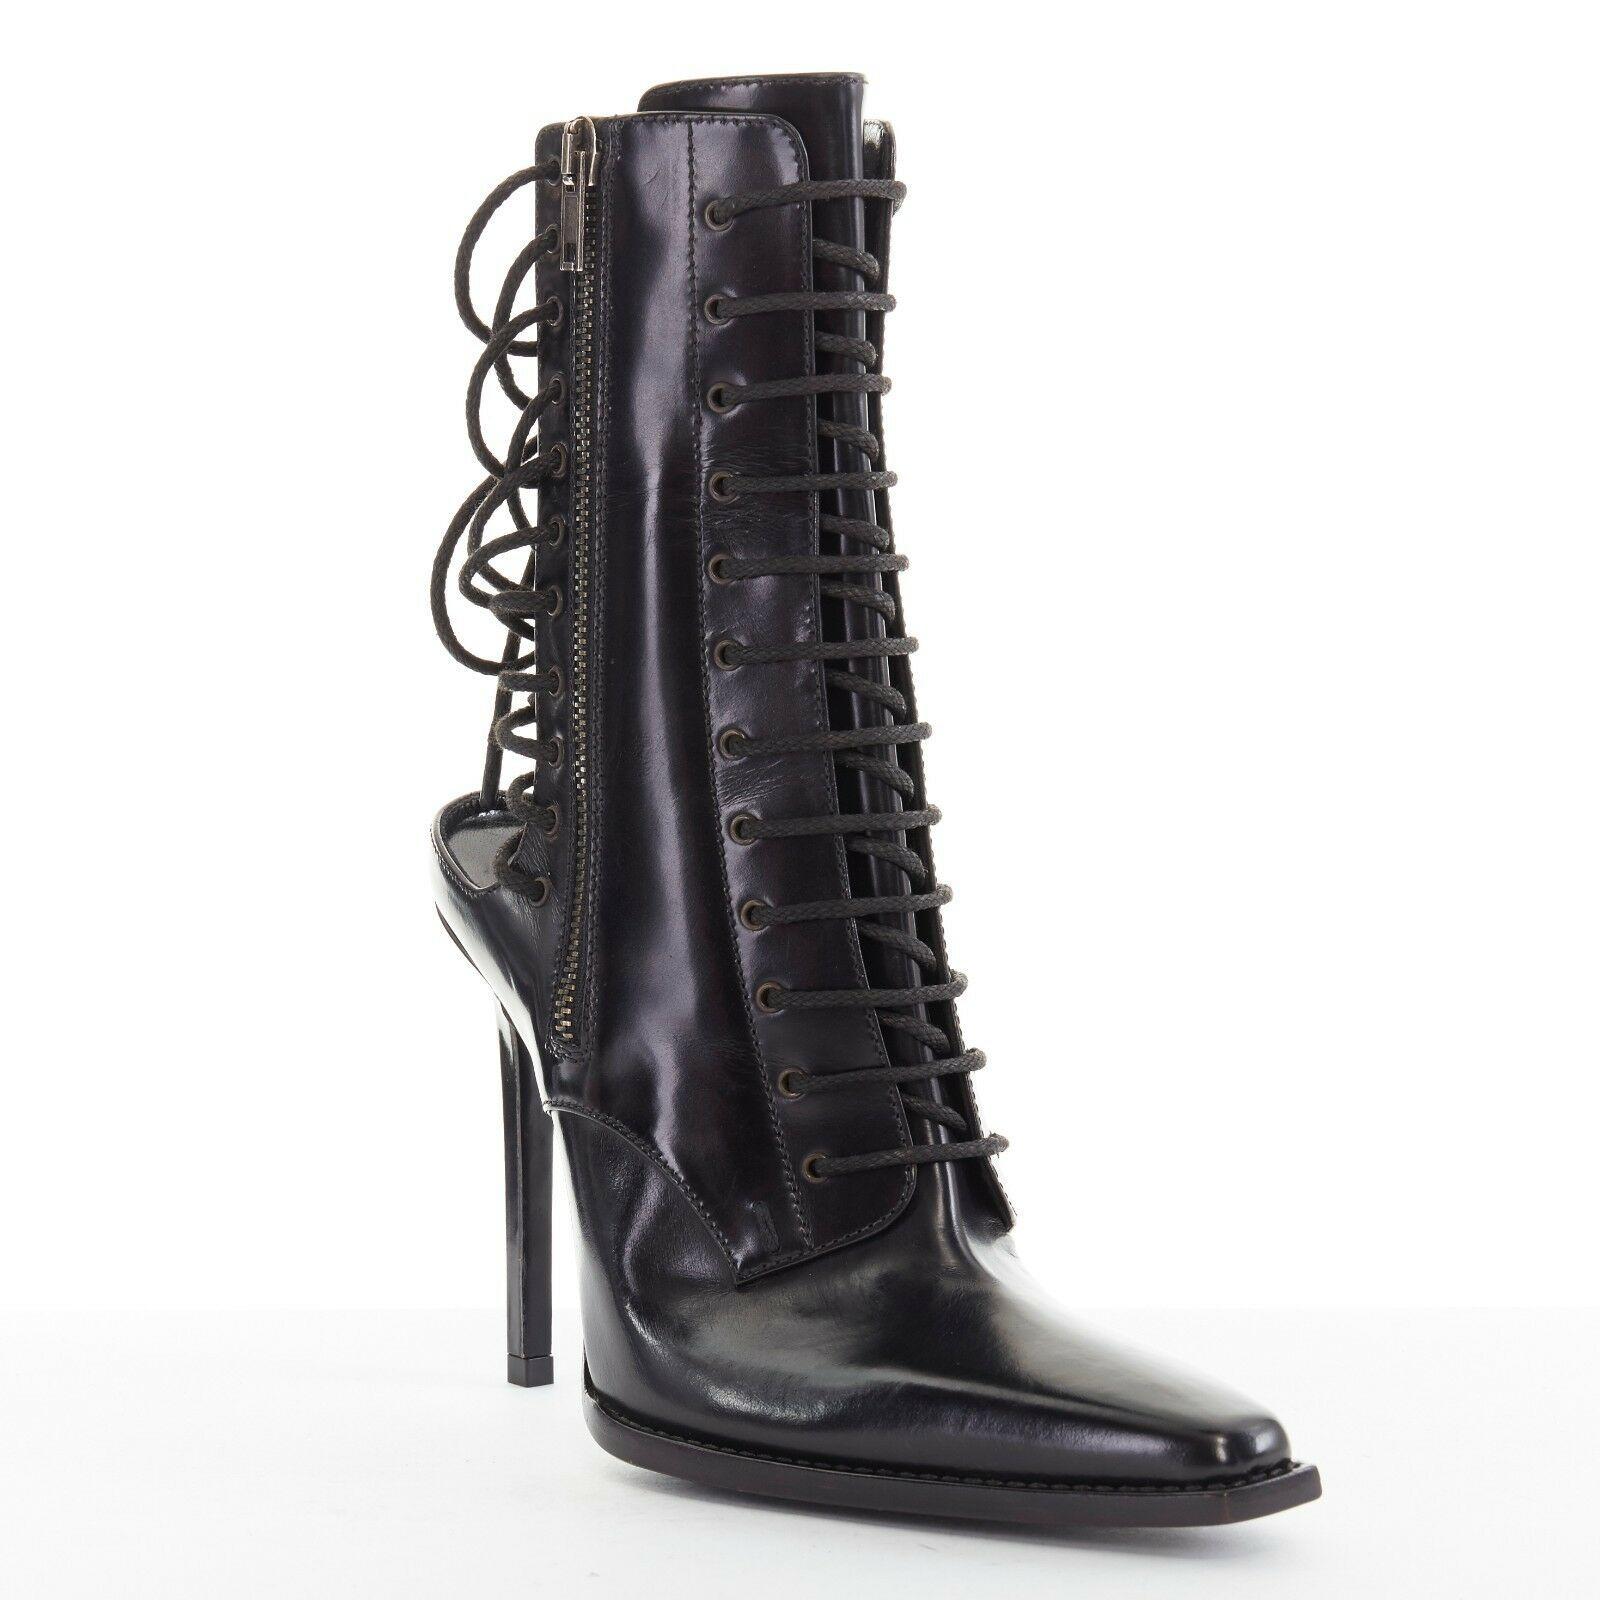 new HAIDER ACKERMANN Runway black leather open laced back heel boots EU37 US7

HAIDER ACKERMANN
Black glossy leather upper. Decorative military lace front with tongue detail. Zip closure on both sides. Open back. Eyelet and lace detail at heel. Slim